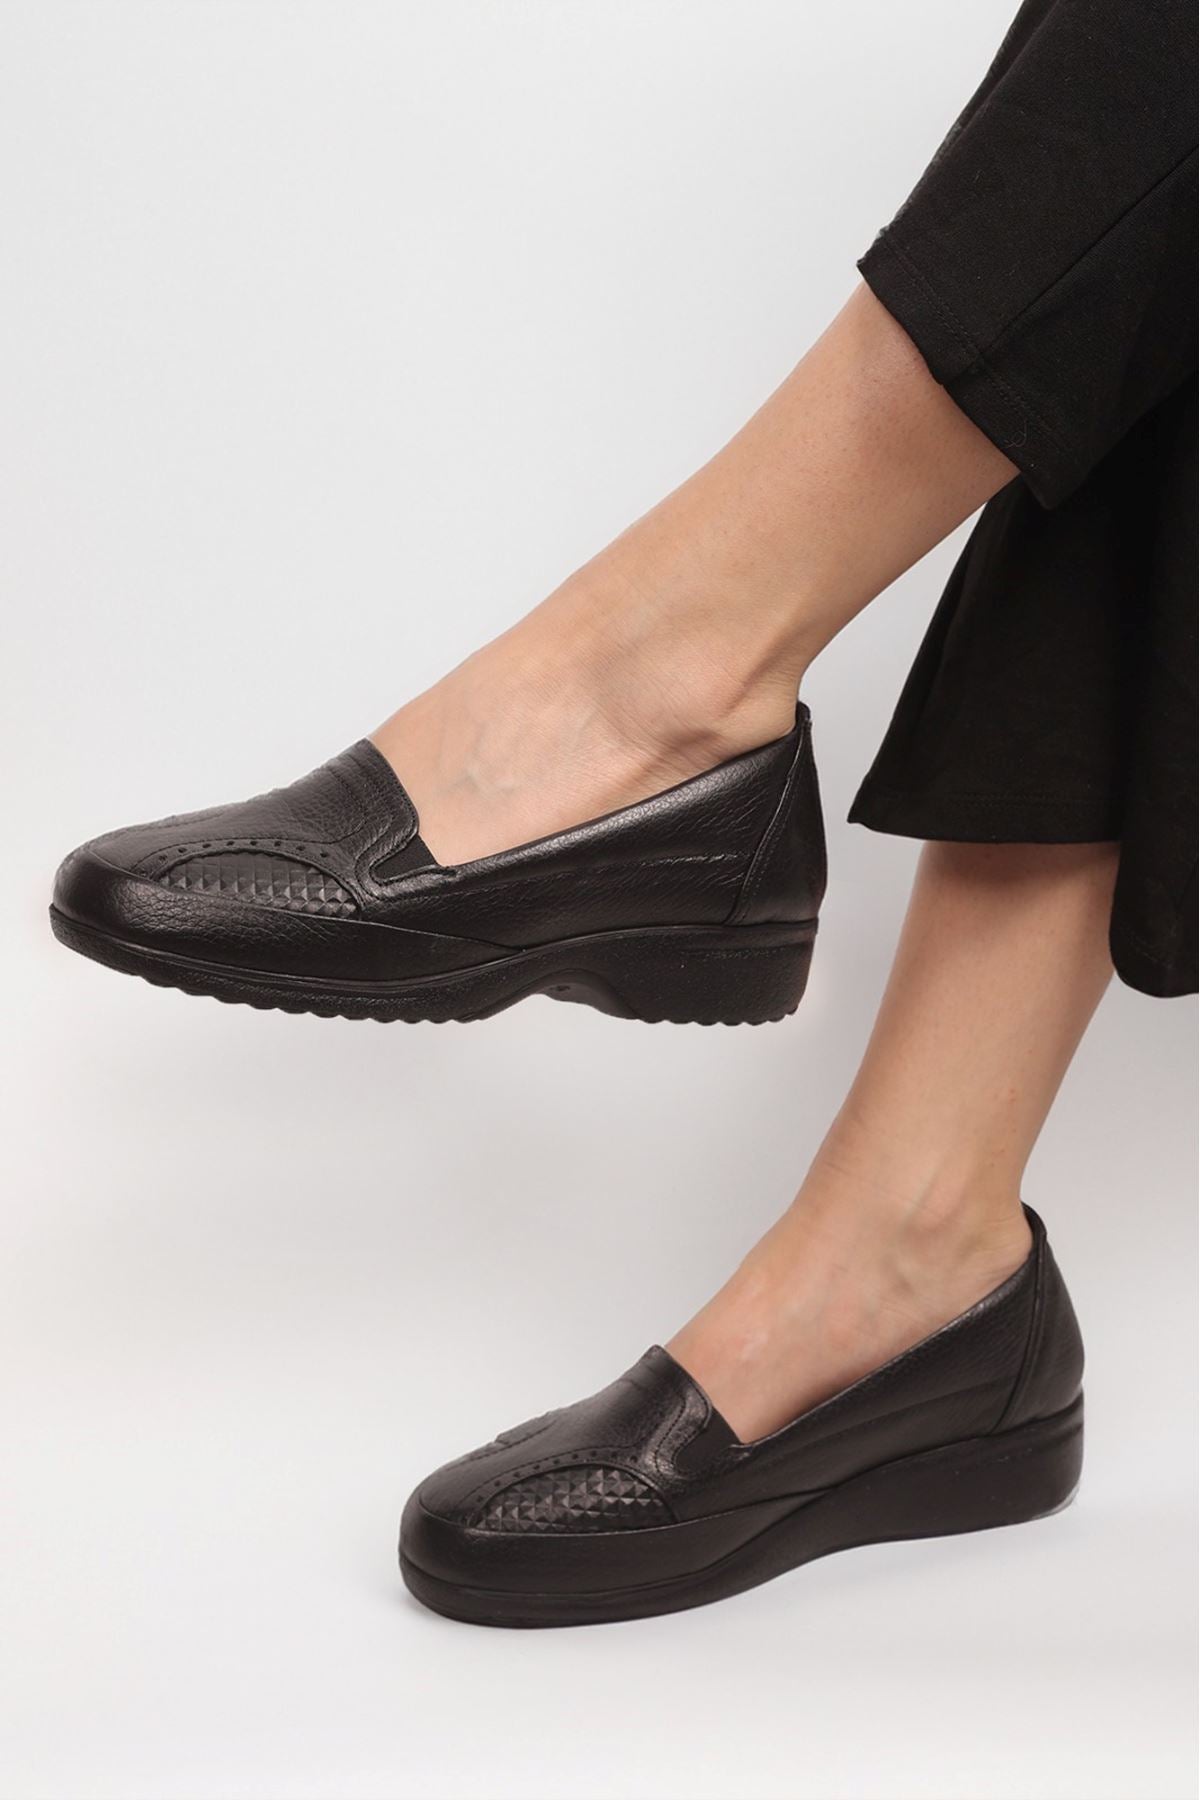 Women's Genuine Leather Non-Slip Soft Sole shoes - STREETMODE ™